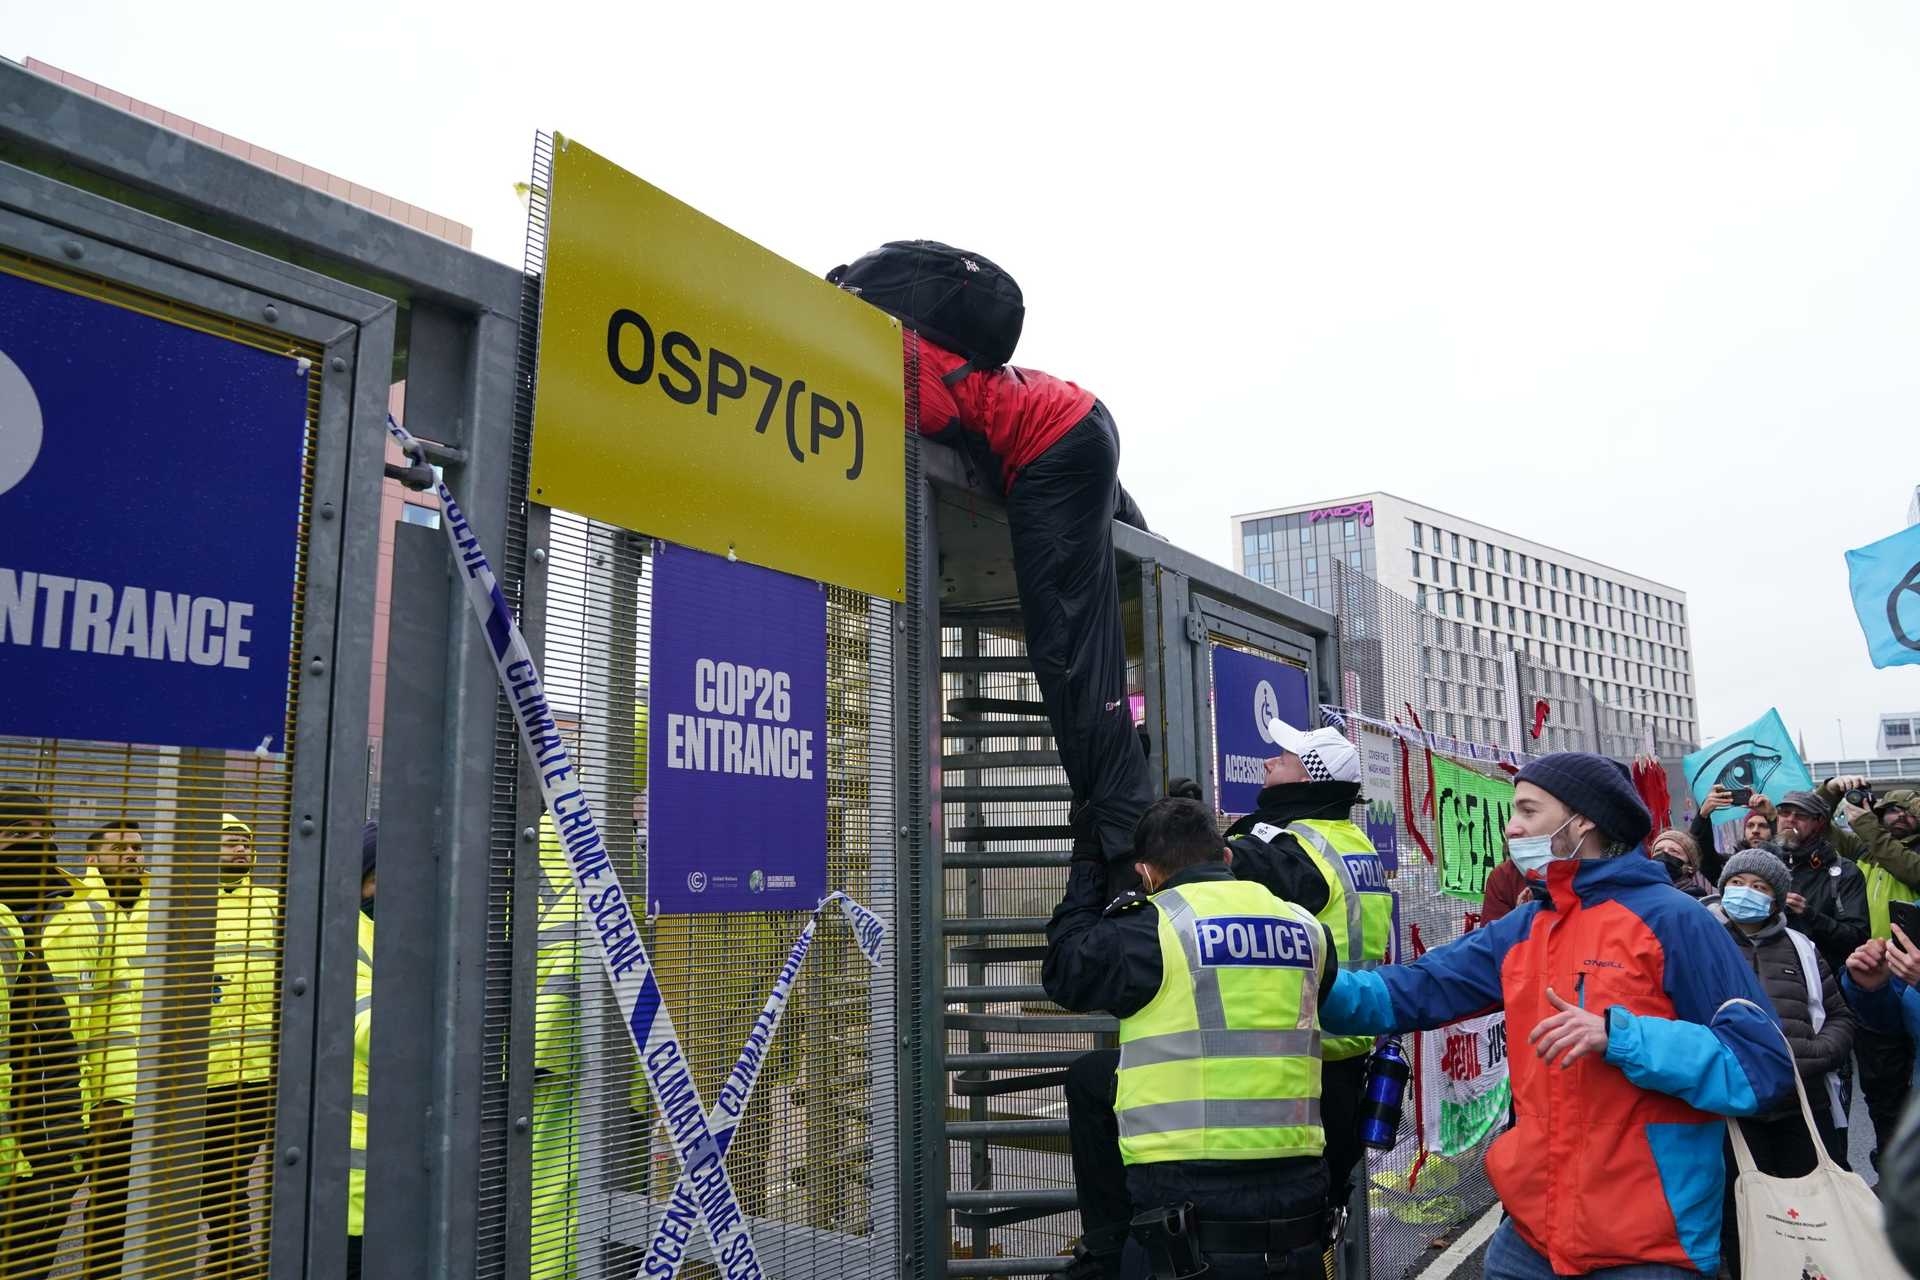 A protester tries to climb over the fence into COP26.